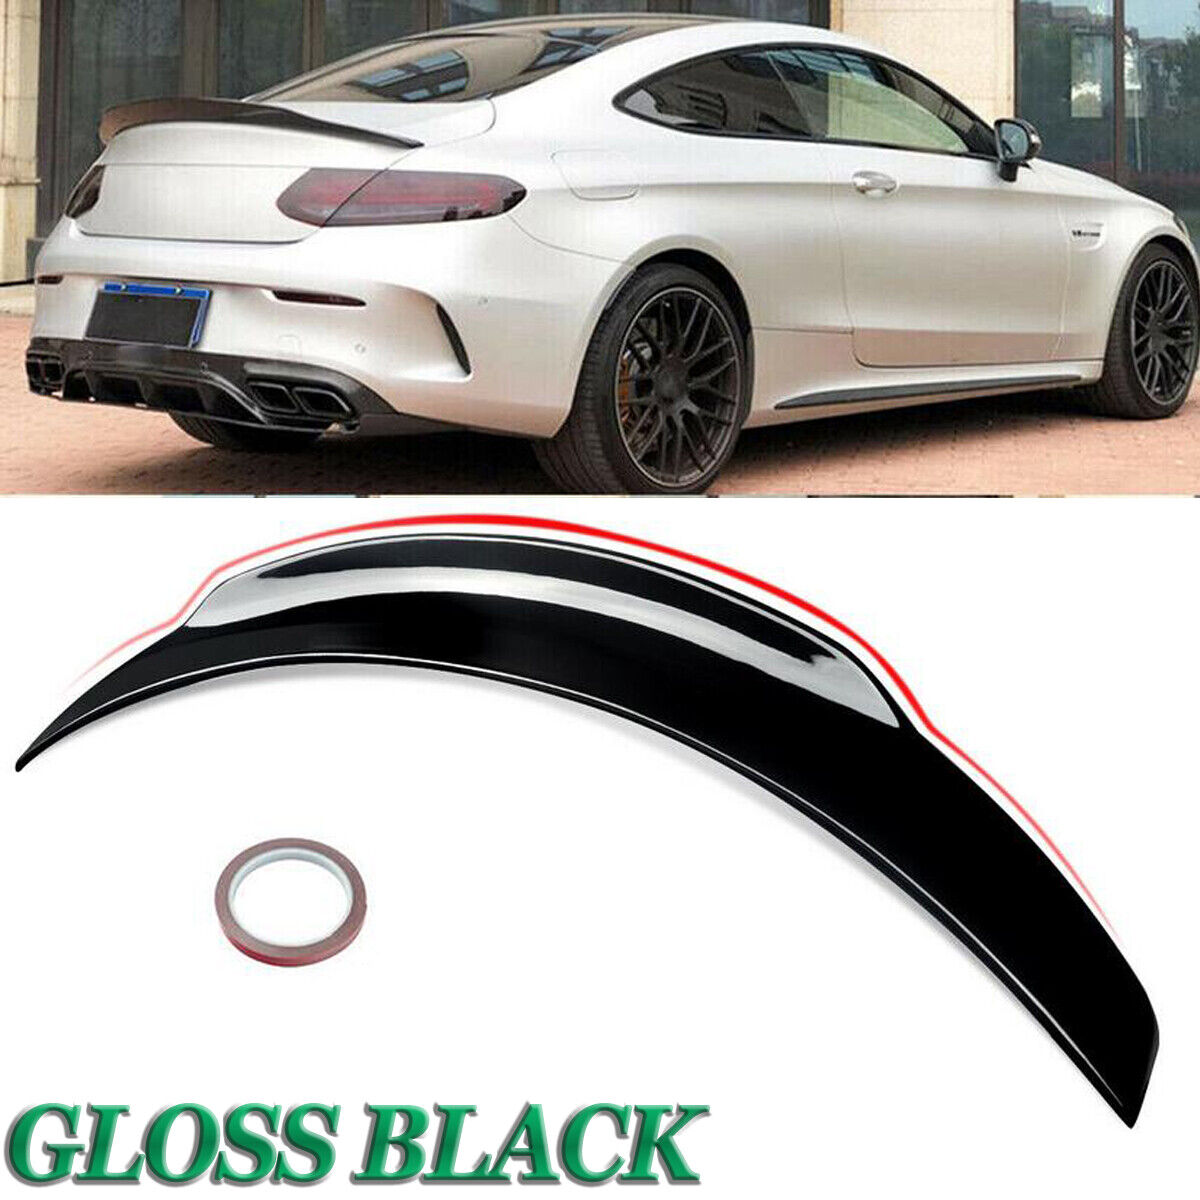 Glossy Black Rear Trunk Spoiler Wing Fit For Benz W205 C205 C43 C63 AMG Coupe